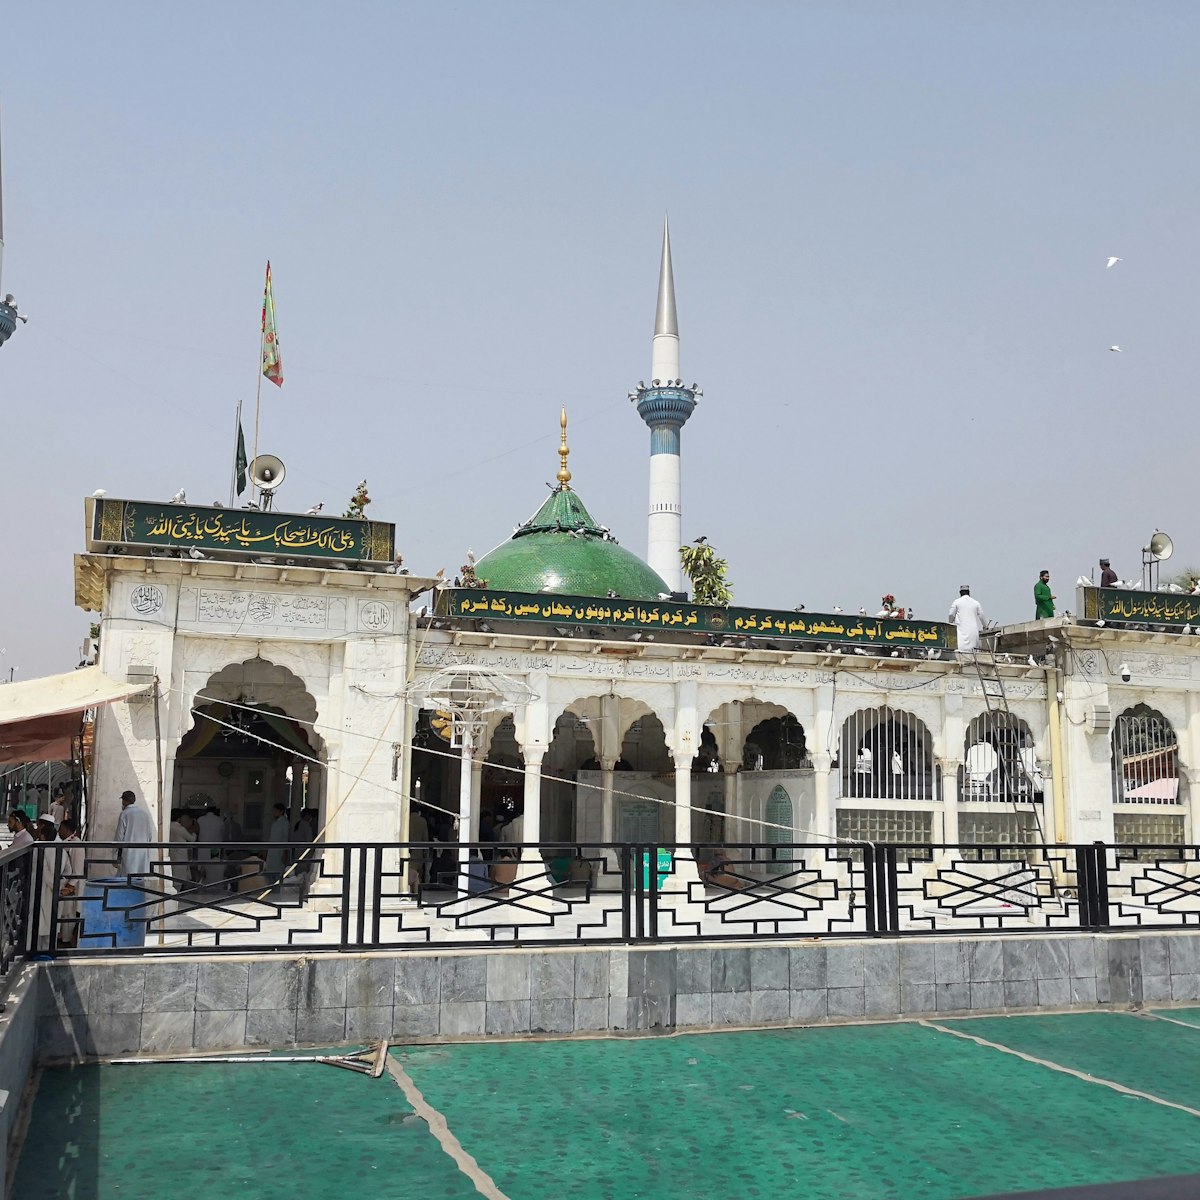 Pakistan, Lahore 30 May 2018; Data Darbar (Data Durbar) is the largest Sufi shrine in South Asia, It was build to house of Muslim mystic, Abul Hassan Ali Hujwiri, Known as Data Ganj Baksh at Punjab.; Shutterstock ID 1147940222; your: Bridget Brown; gl: 65050; netsuite: Online Editorial; full: POI Image Update